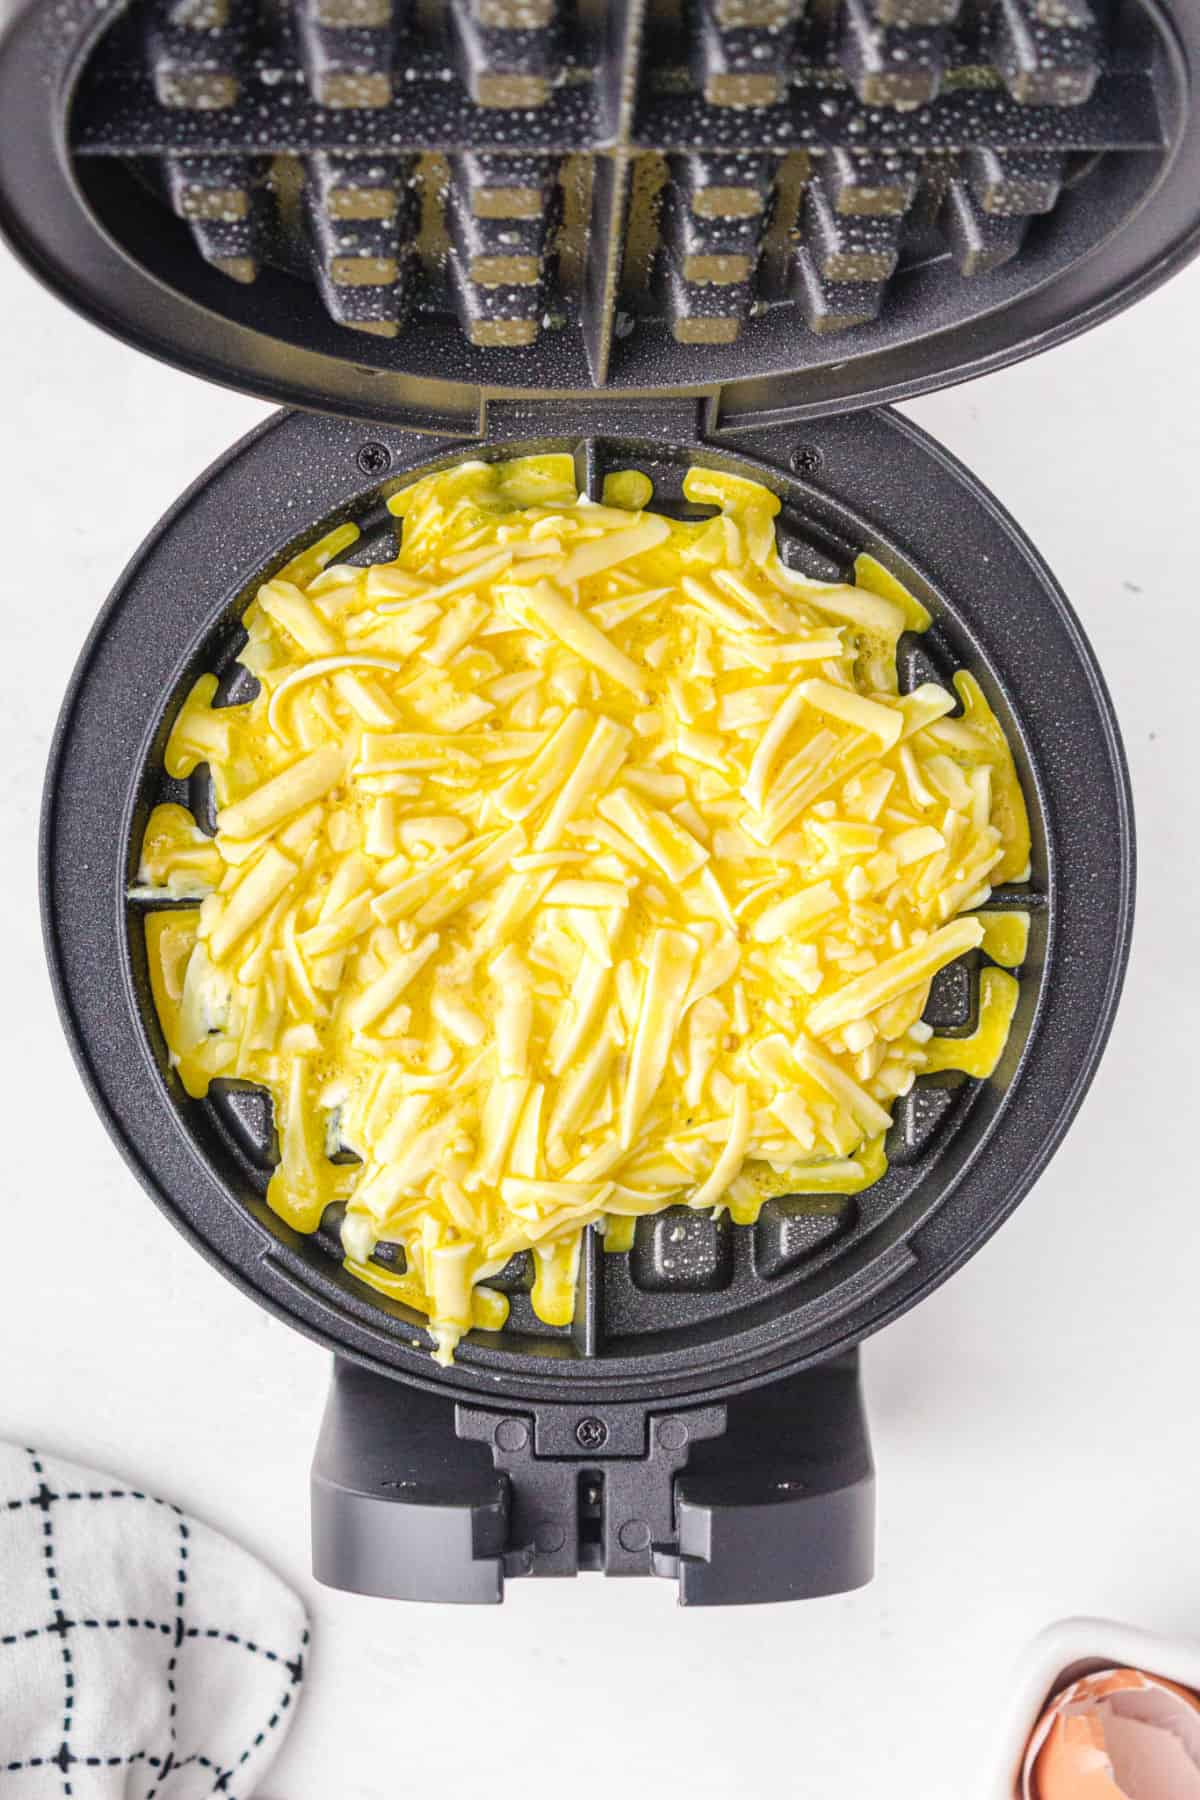 pour batter into waffle maker - chaffle